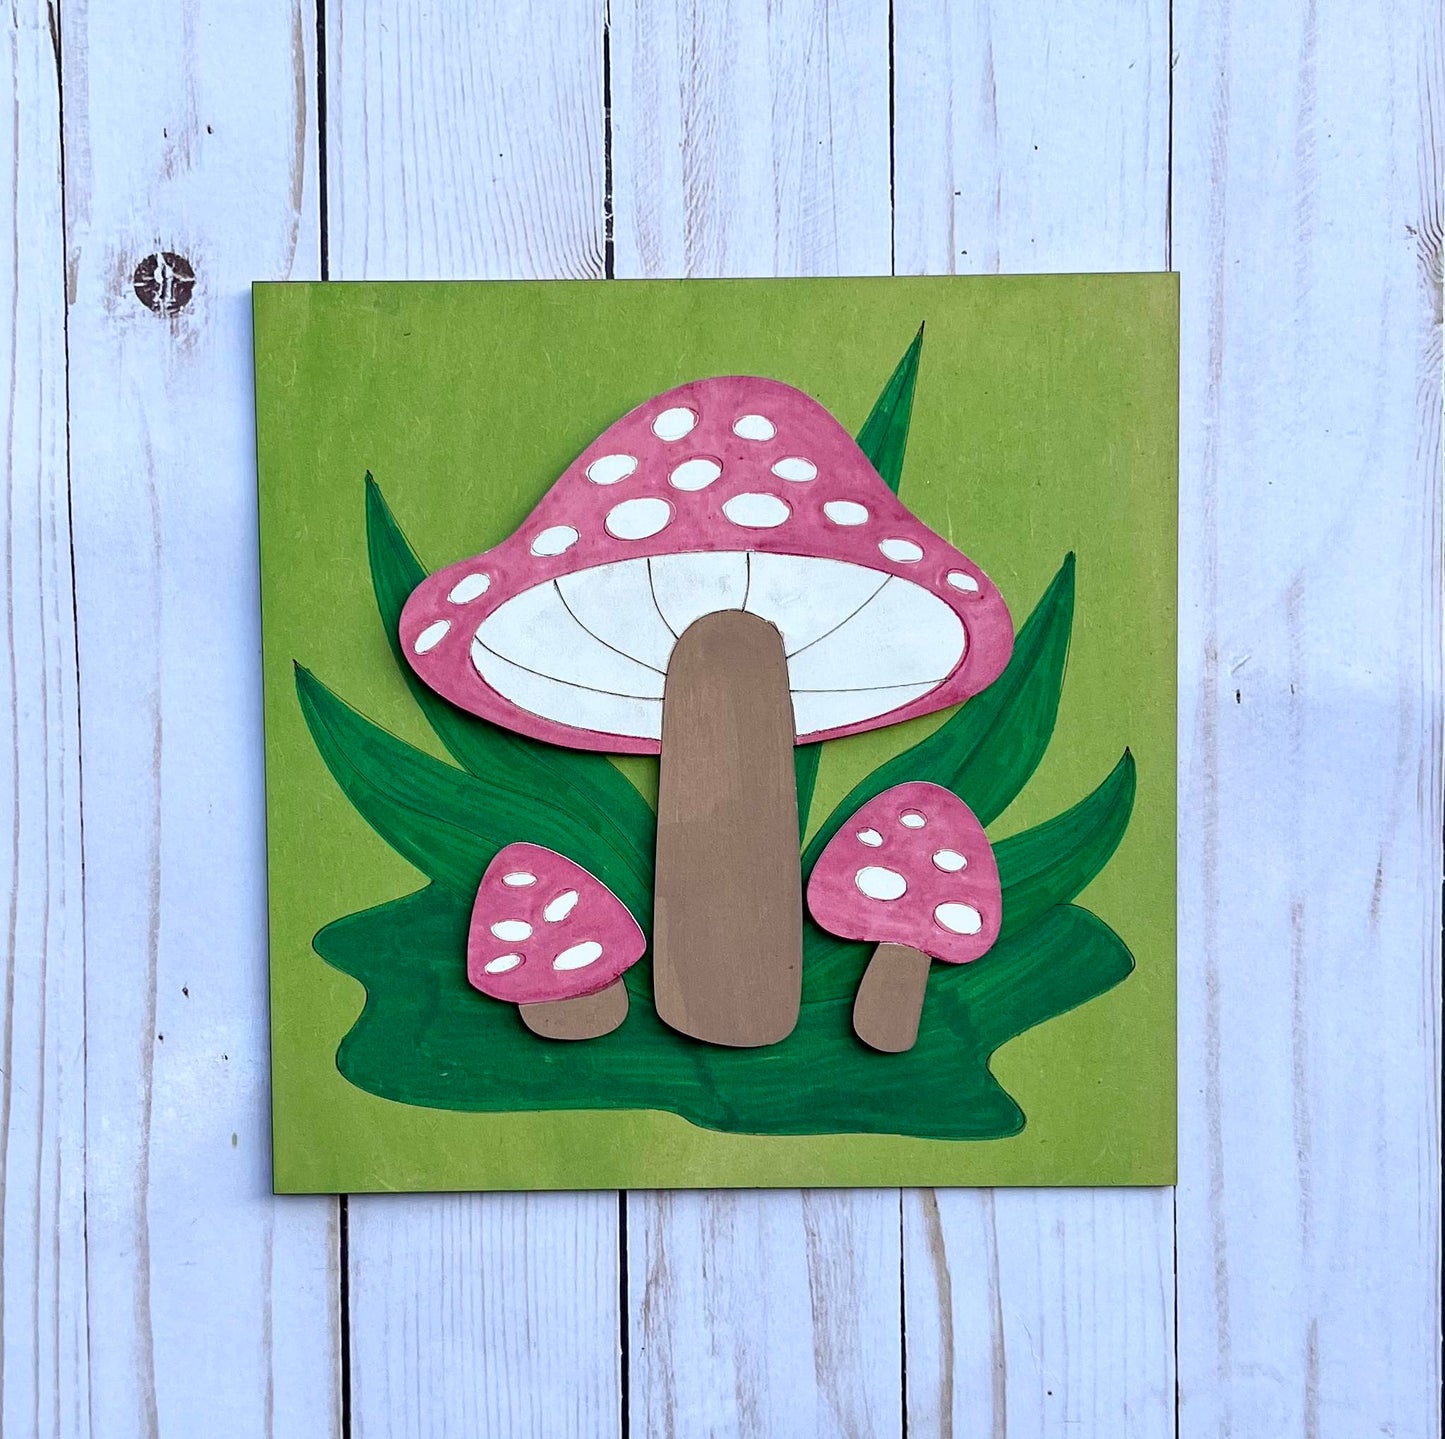 MUSHROOMS - New Creations By Kid's Ready to Paint Kit